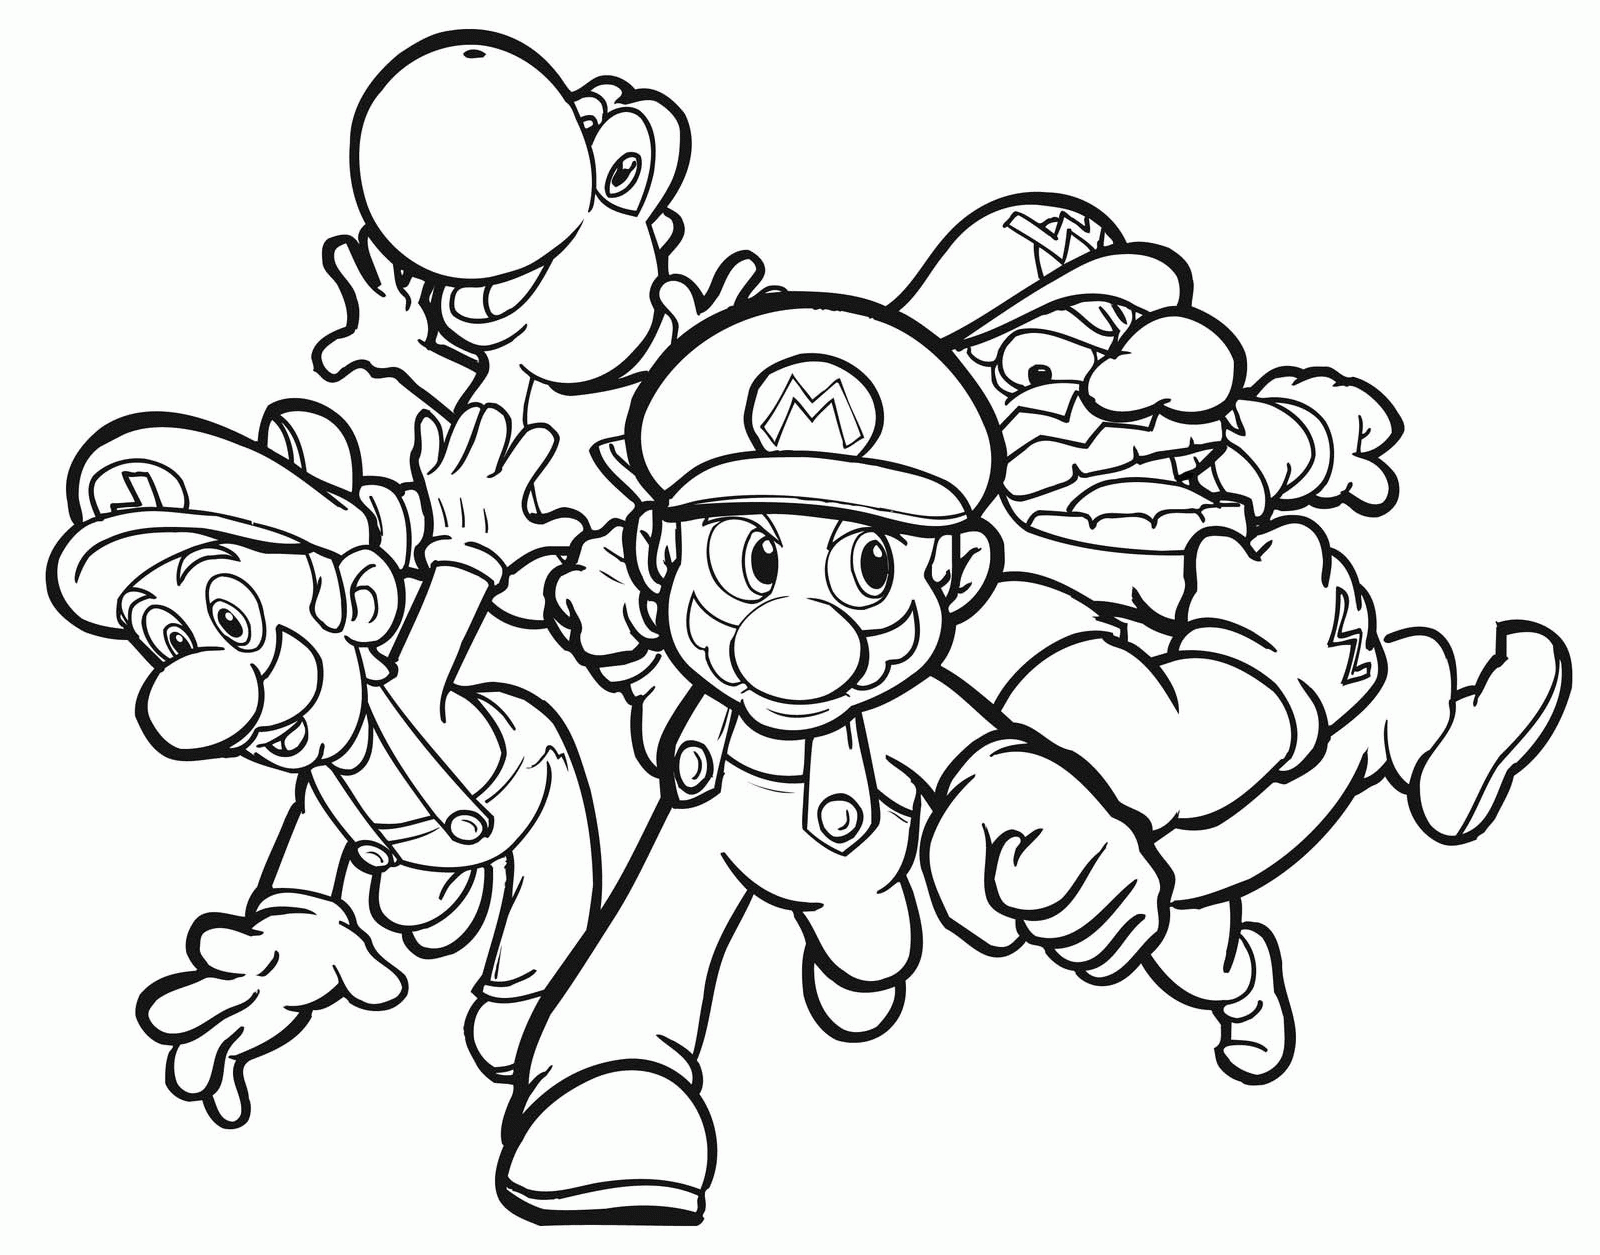 baby-luigi-coloring-pages-at-getcolorings-free-printable